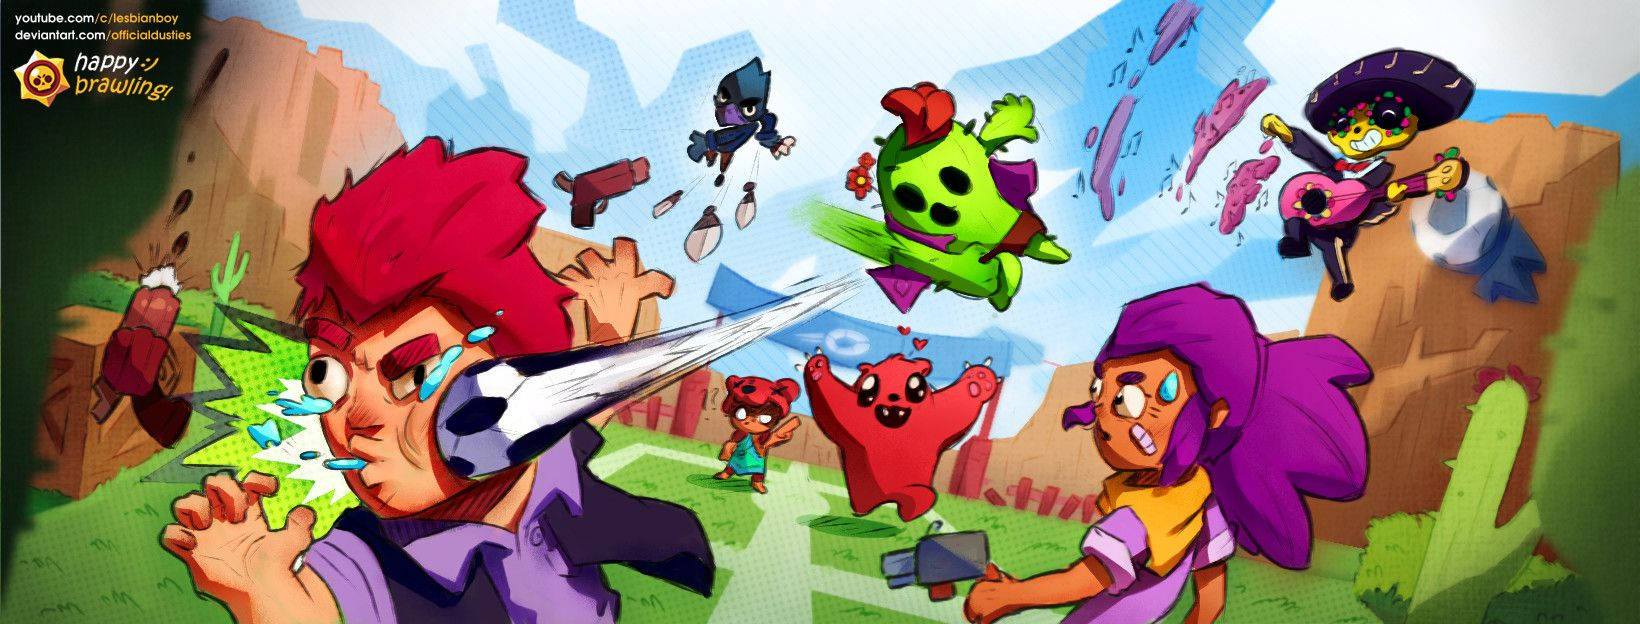 The High-stakes Fight Of The Brawl Stars Brawlers! Background